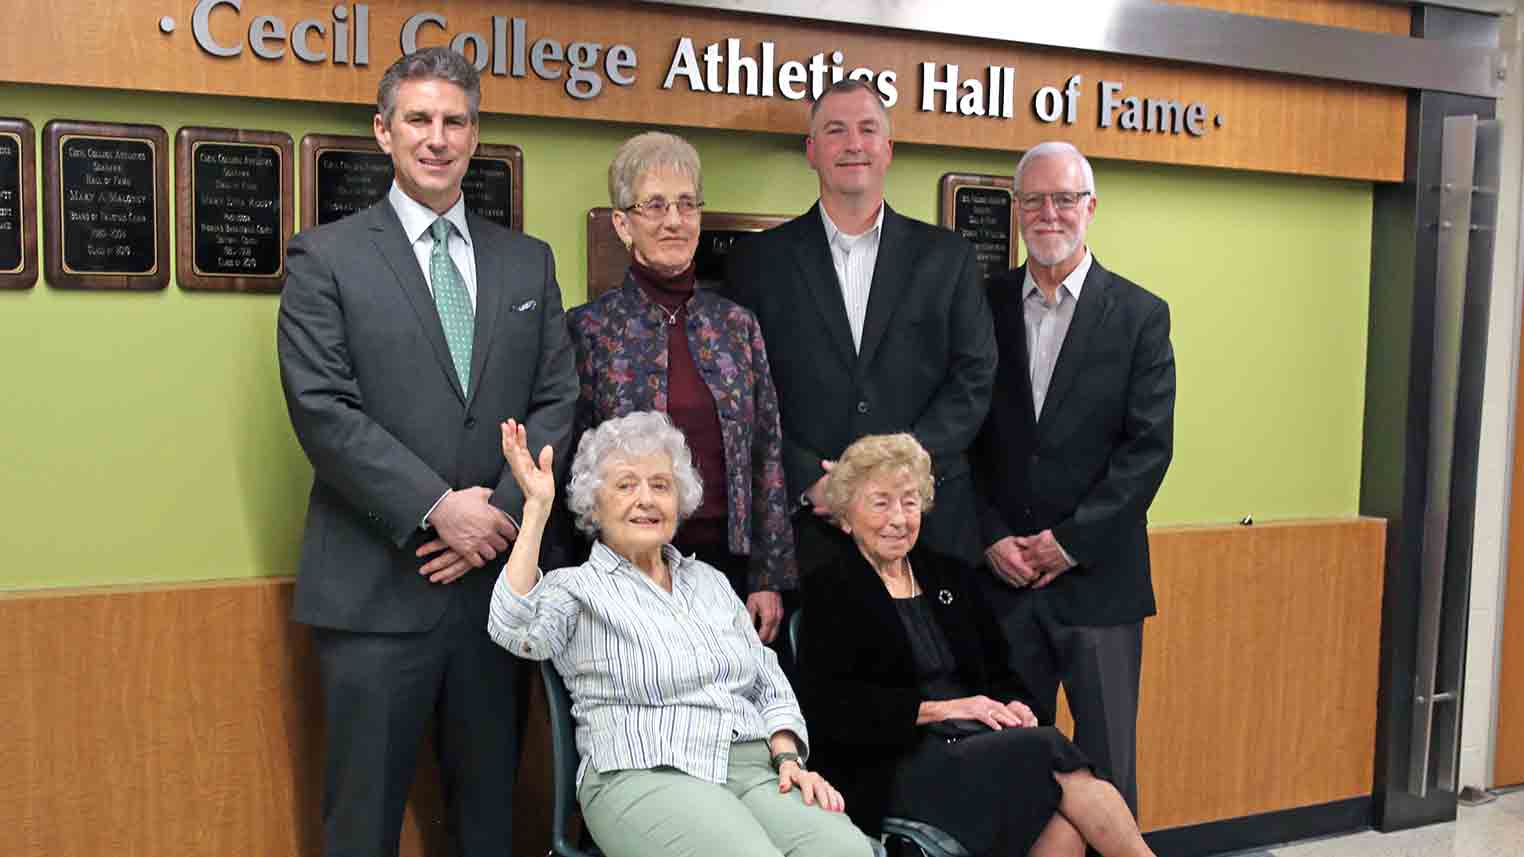 Cecil College Hall of Fame Class of 2019